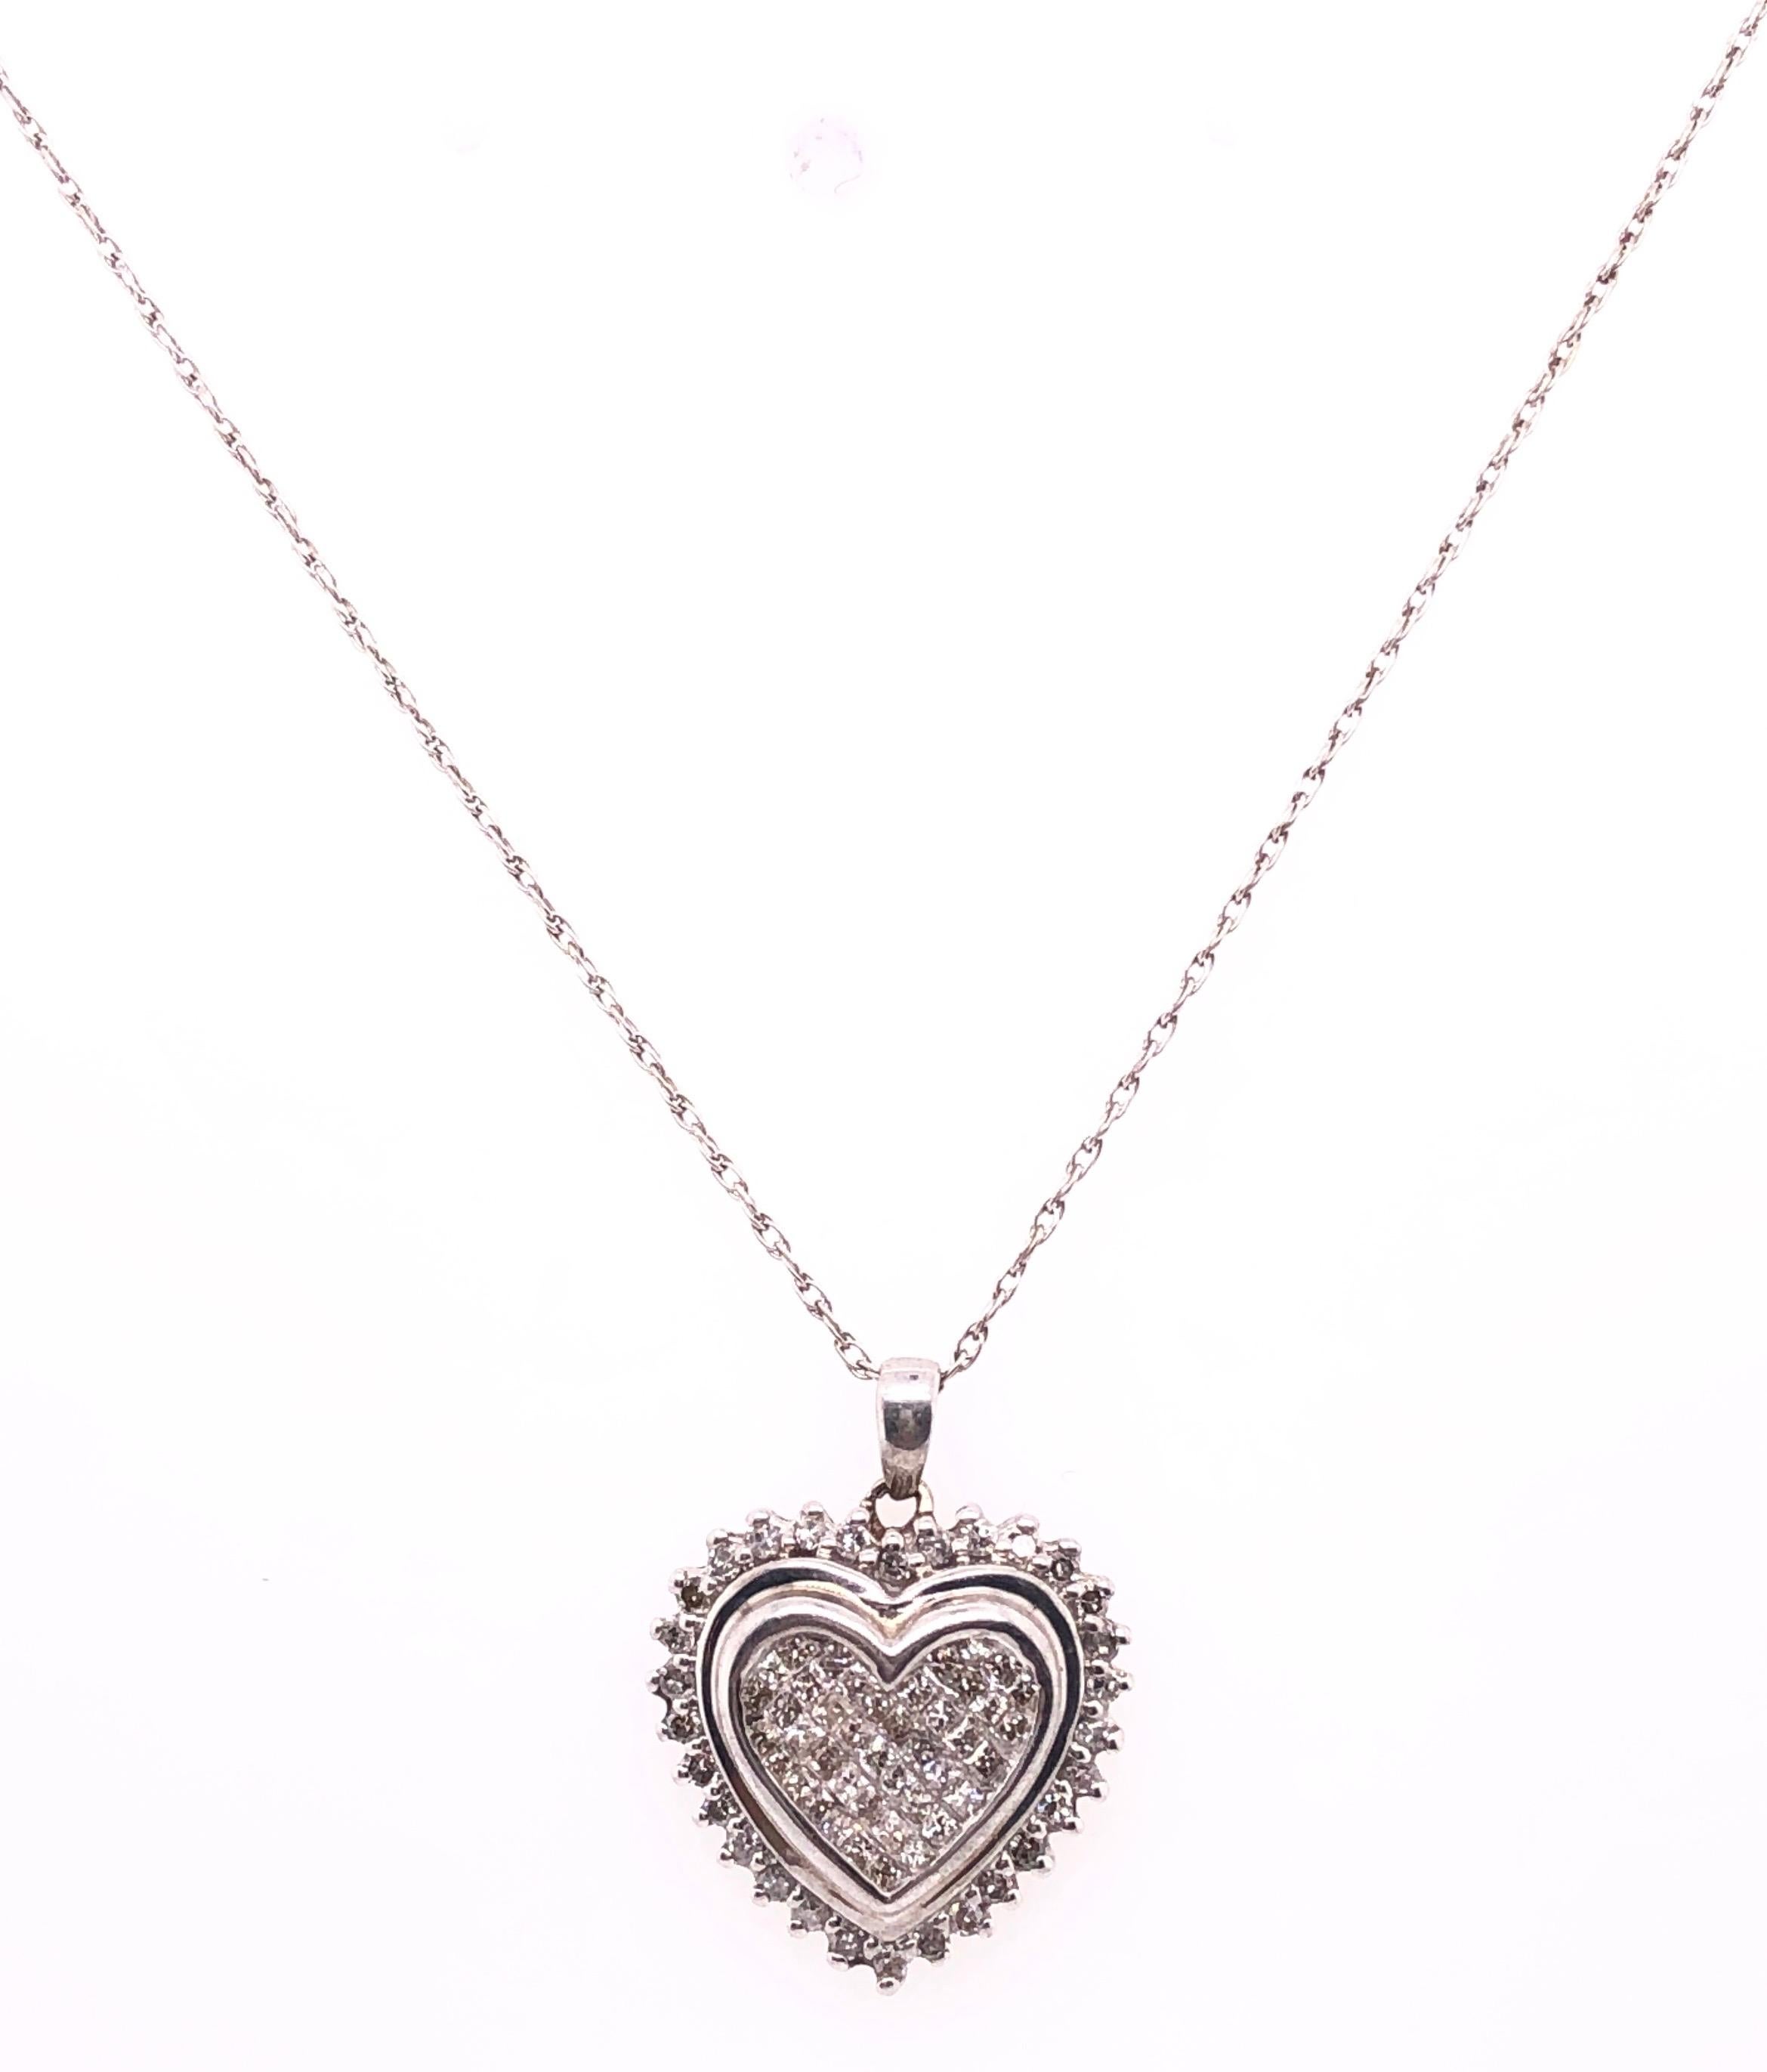 14 Karat White Gold Heart Pendant Necklace with Round Diamonds In Good Condition For Sale In Stamford, CT